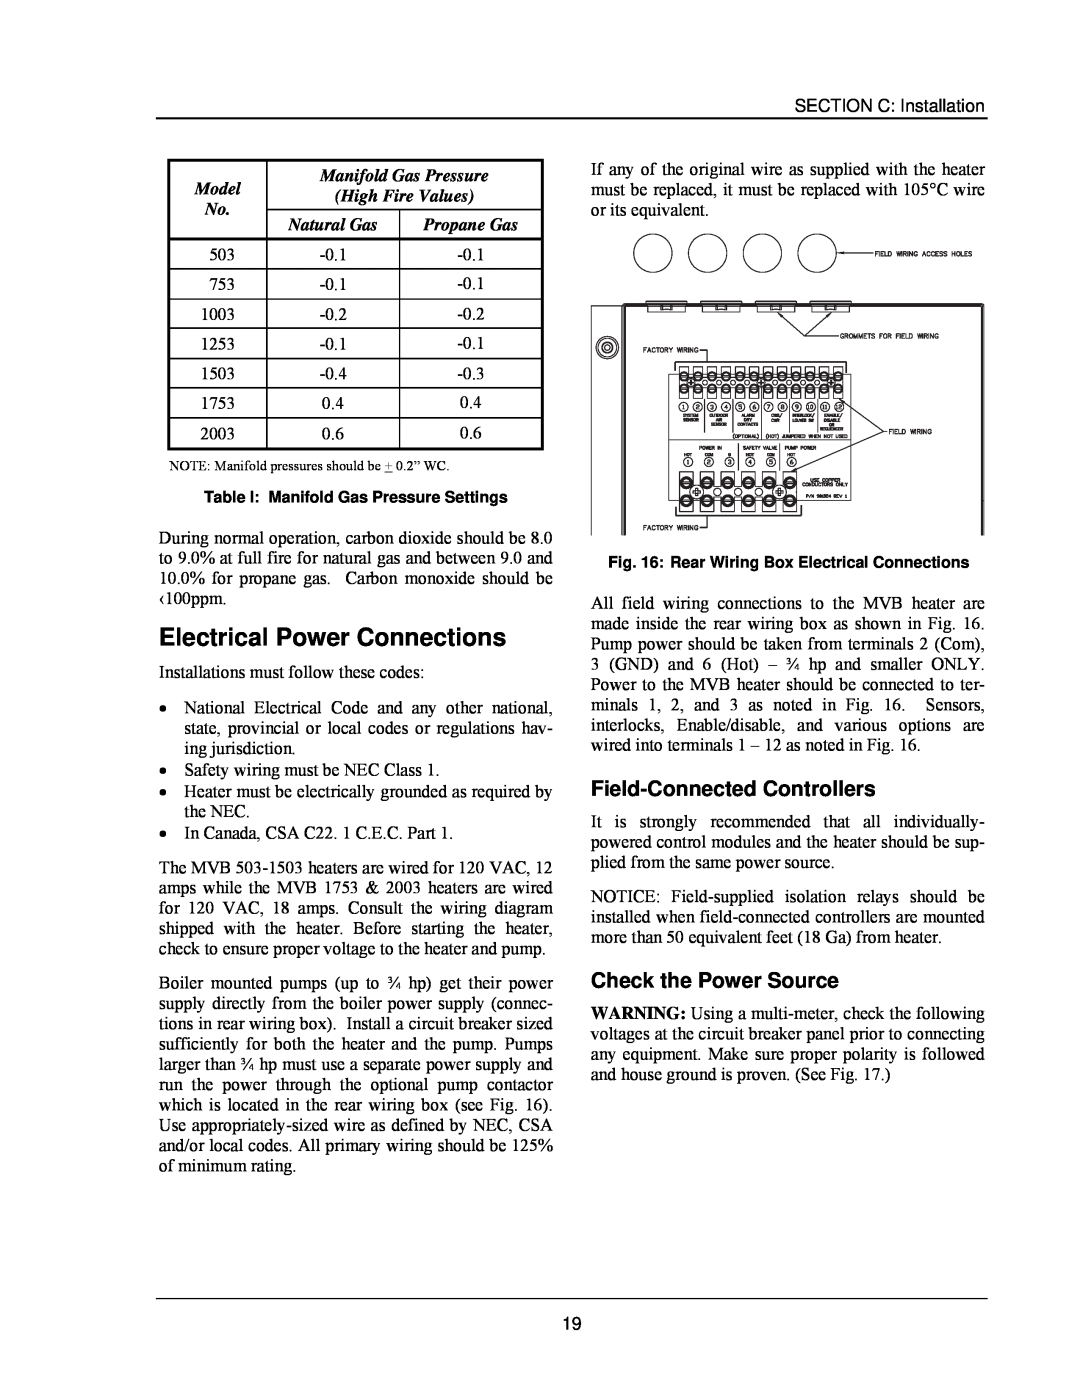 Raypak 503-2003 manual Electrical Power Connections, Field-ConnectedControllers, Check the Power Source 